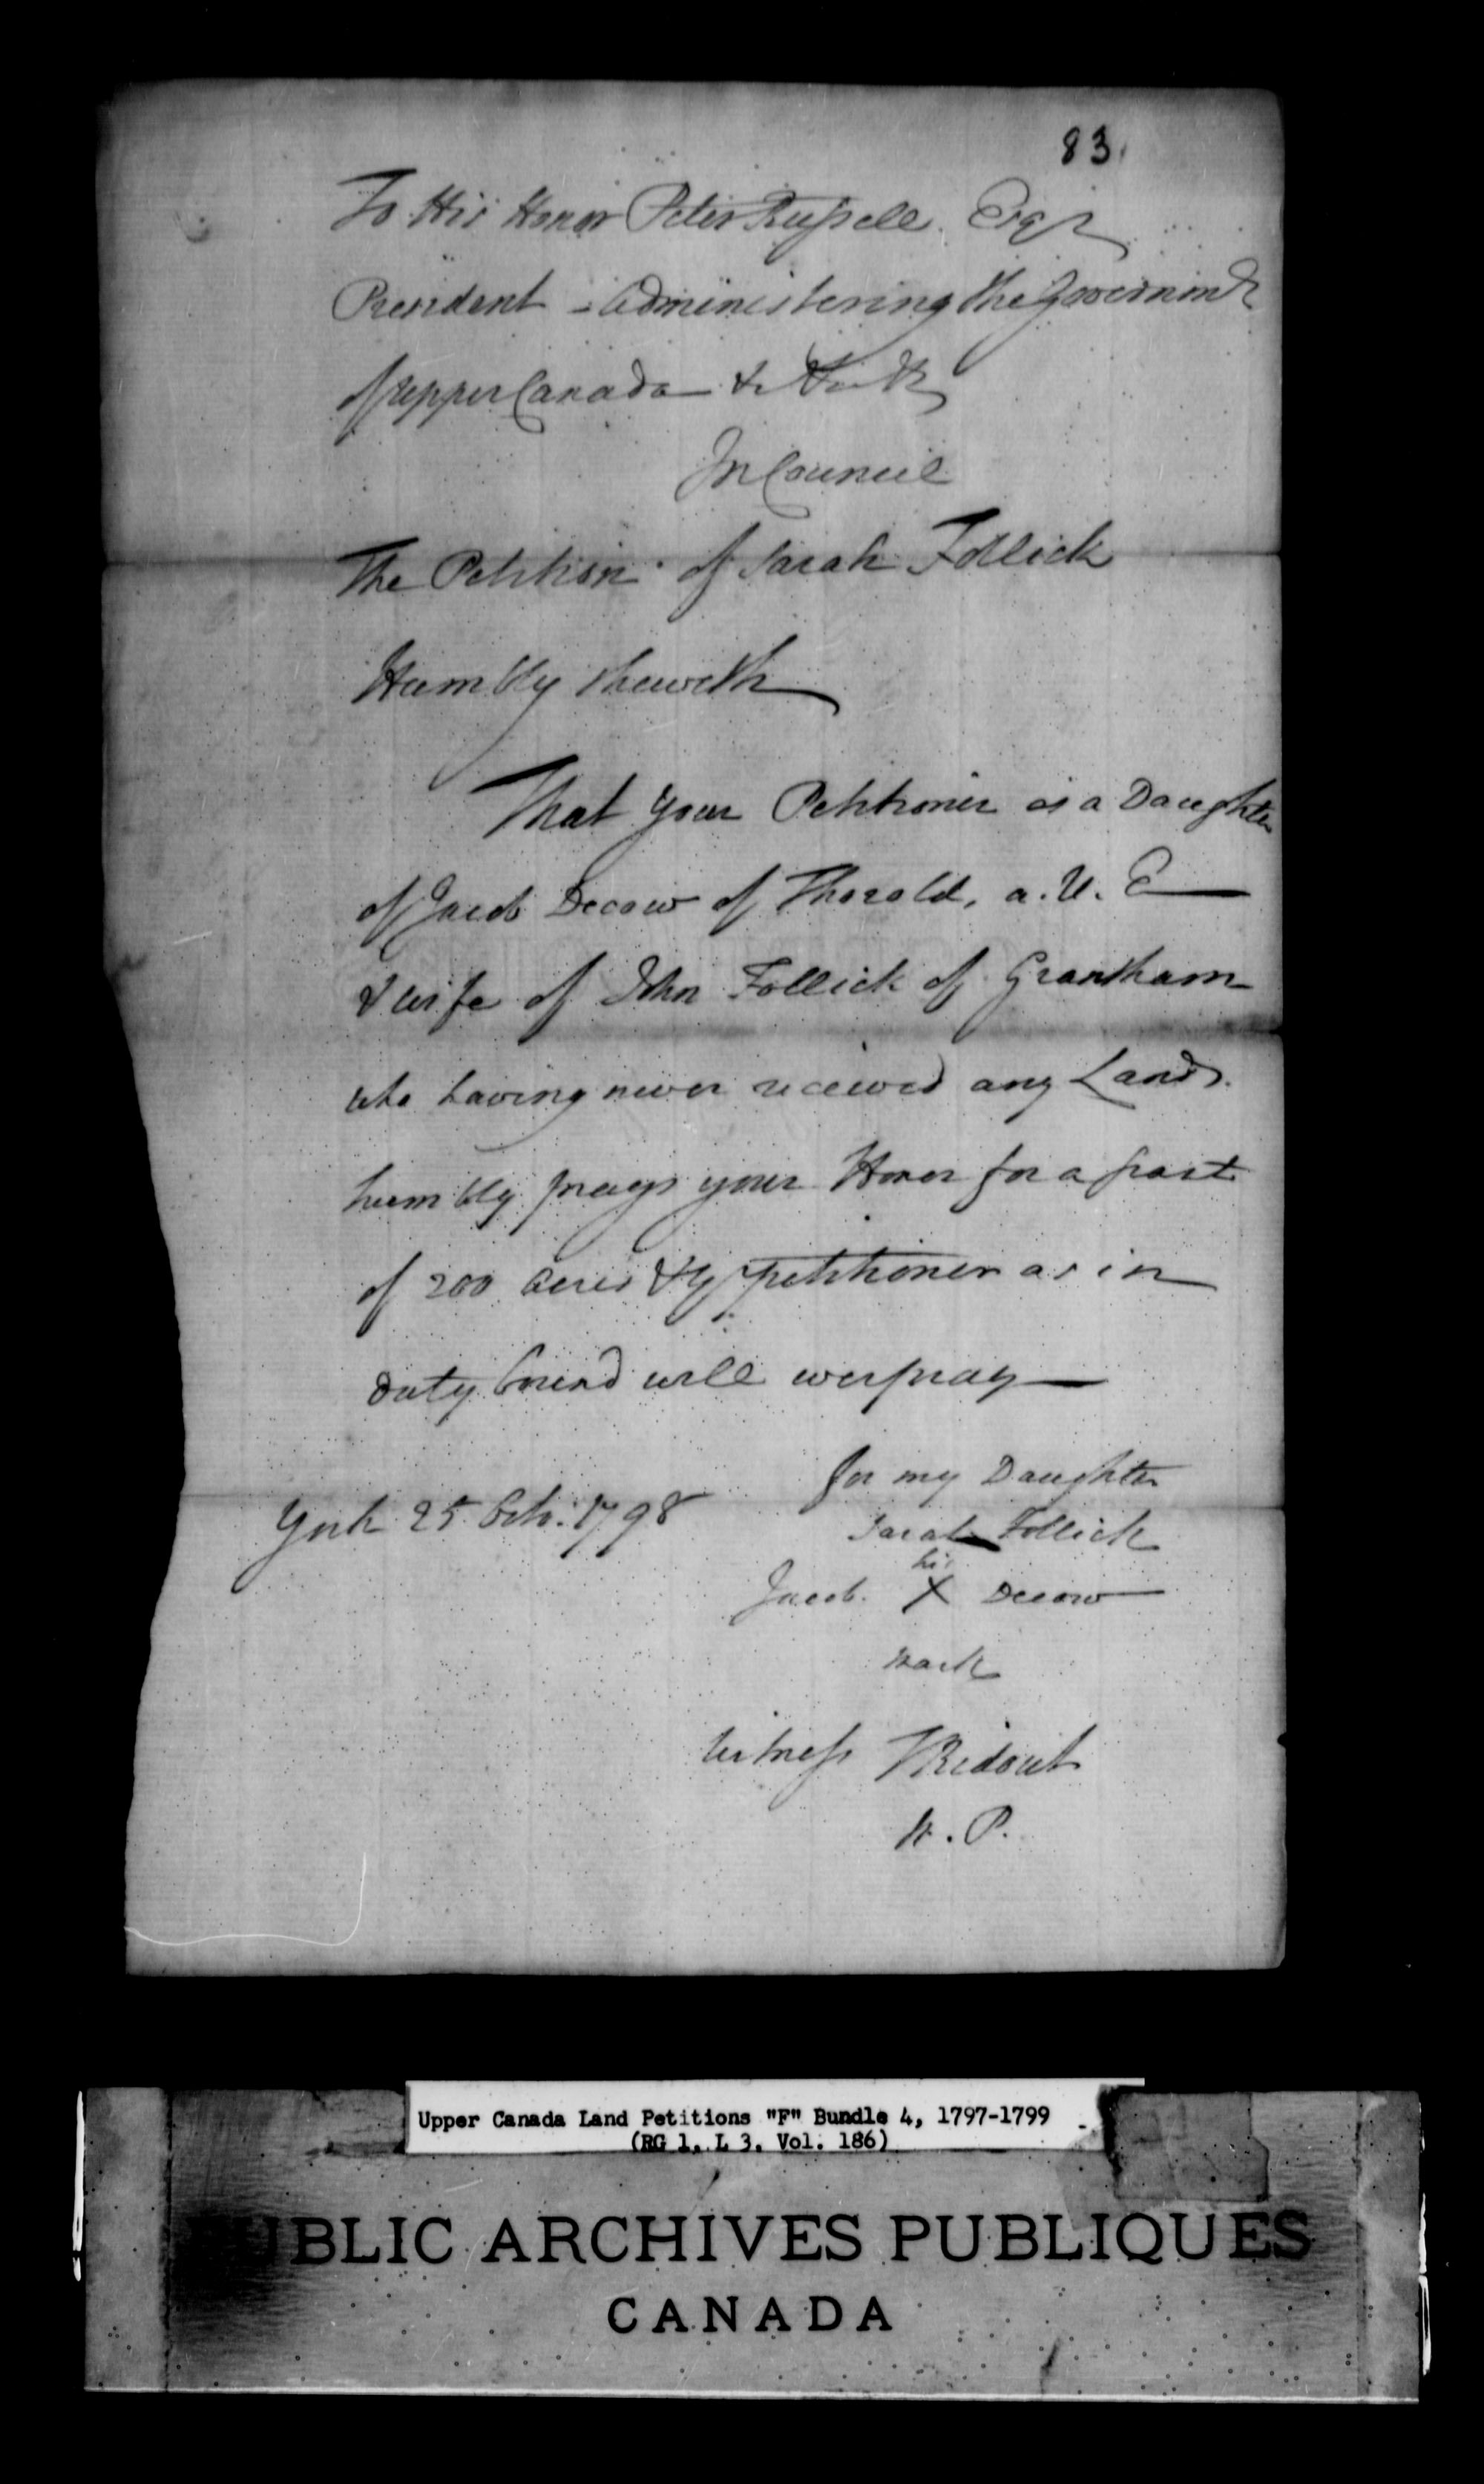 Title: Upper Canada Land Petitions (1763-1865) - Mikan Number: 205131 - Microform: c-1894